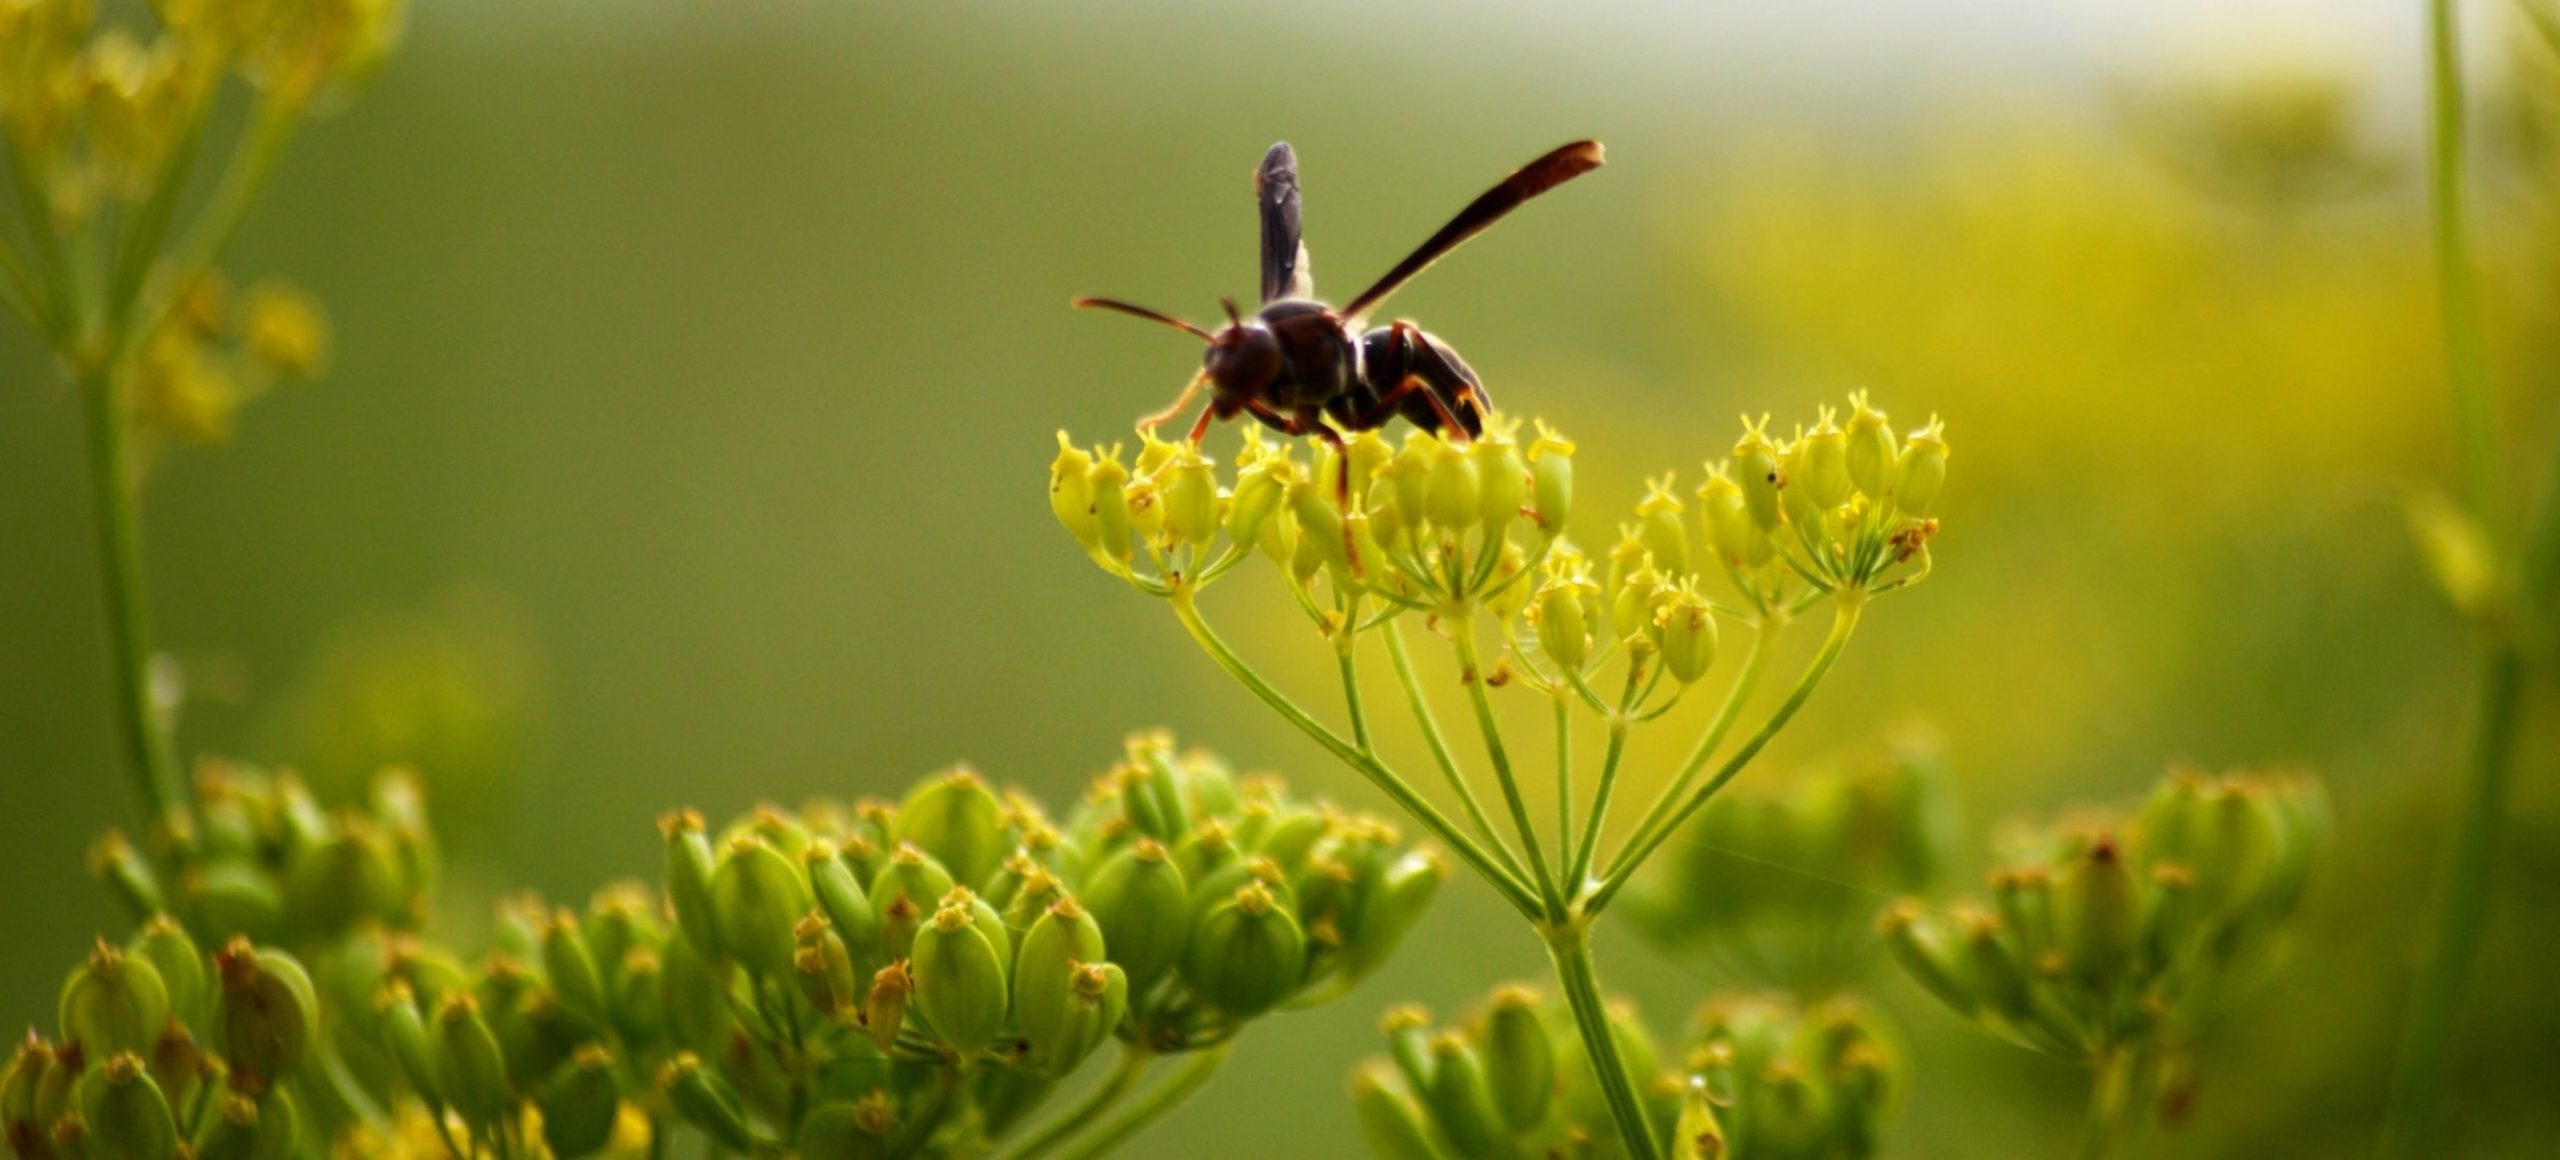 Closeup of a winged insect on yellow wildflowers.